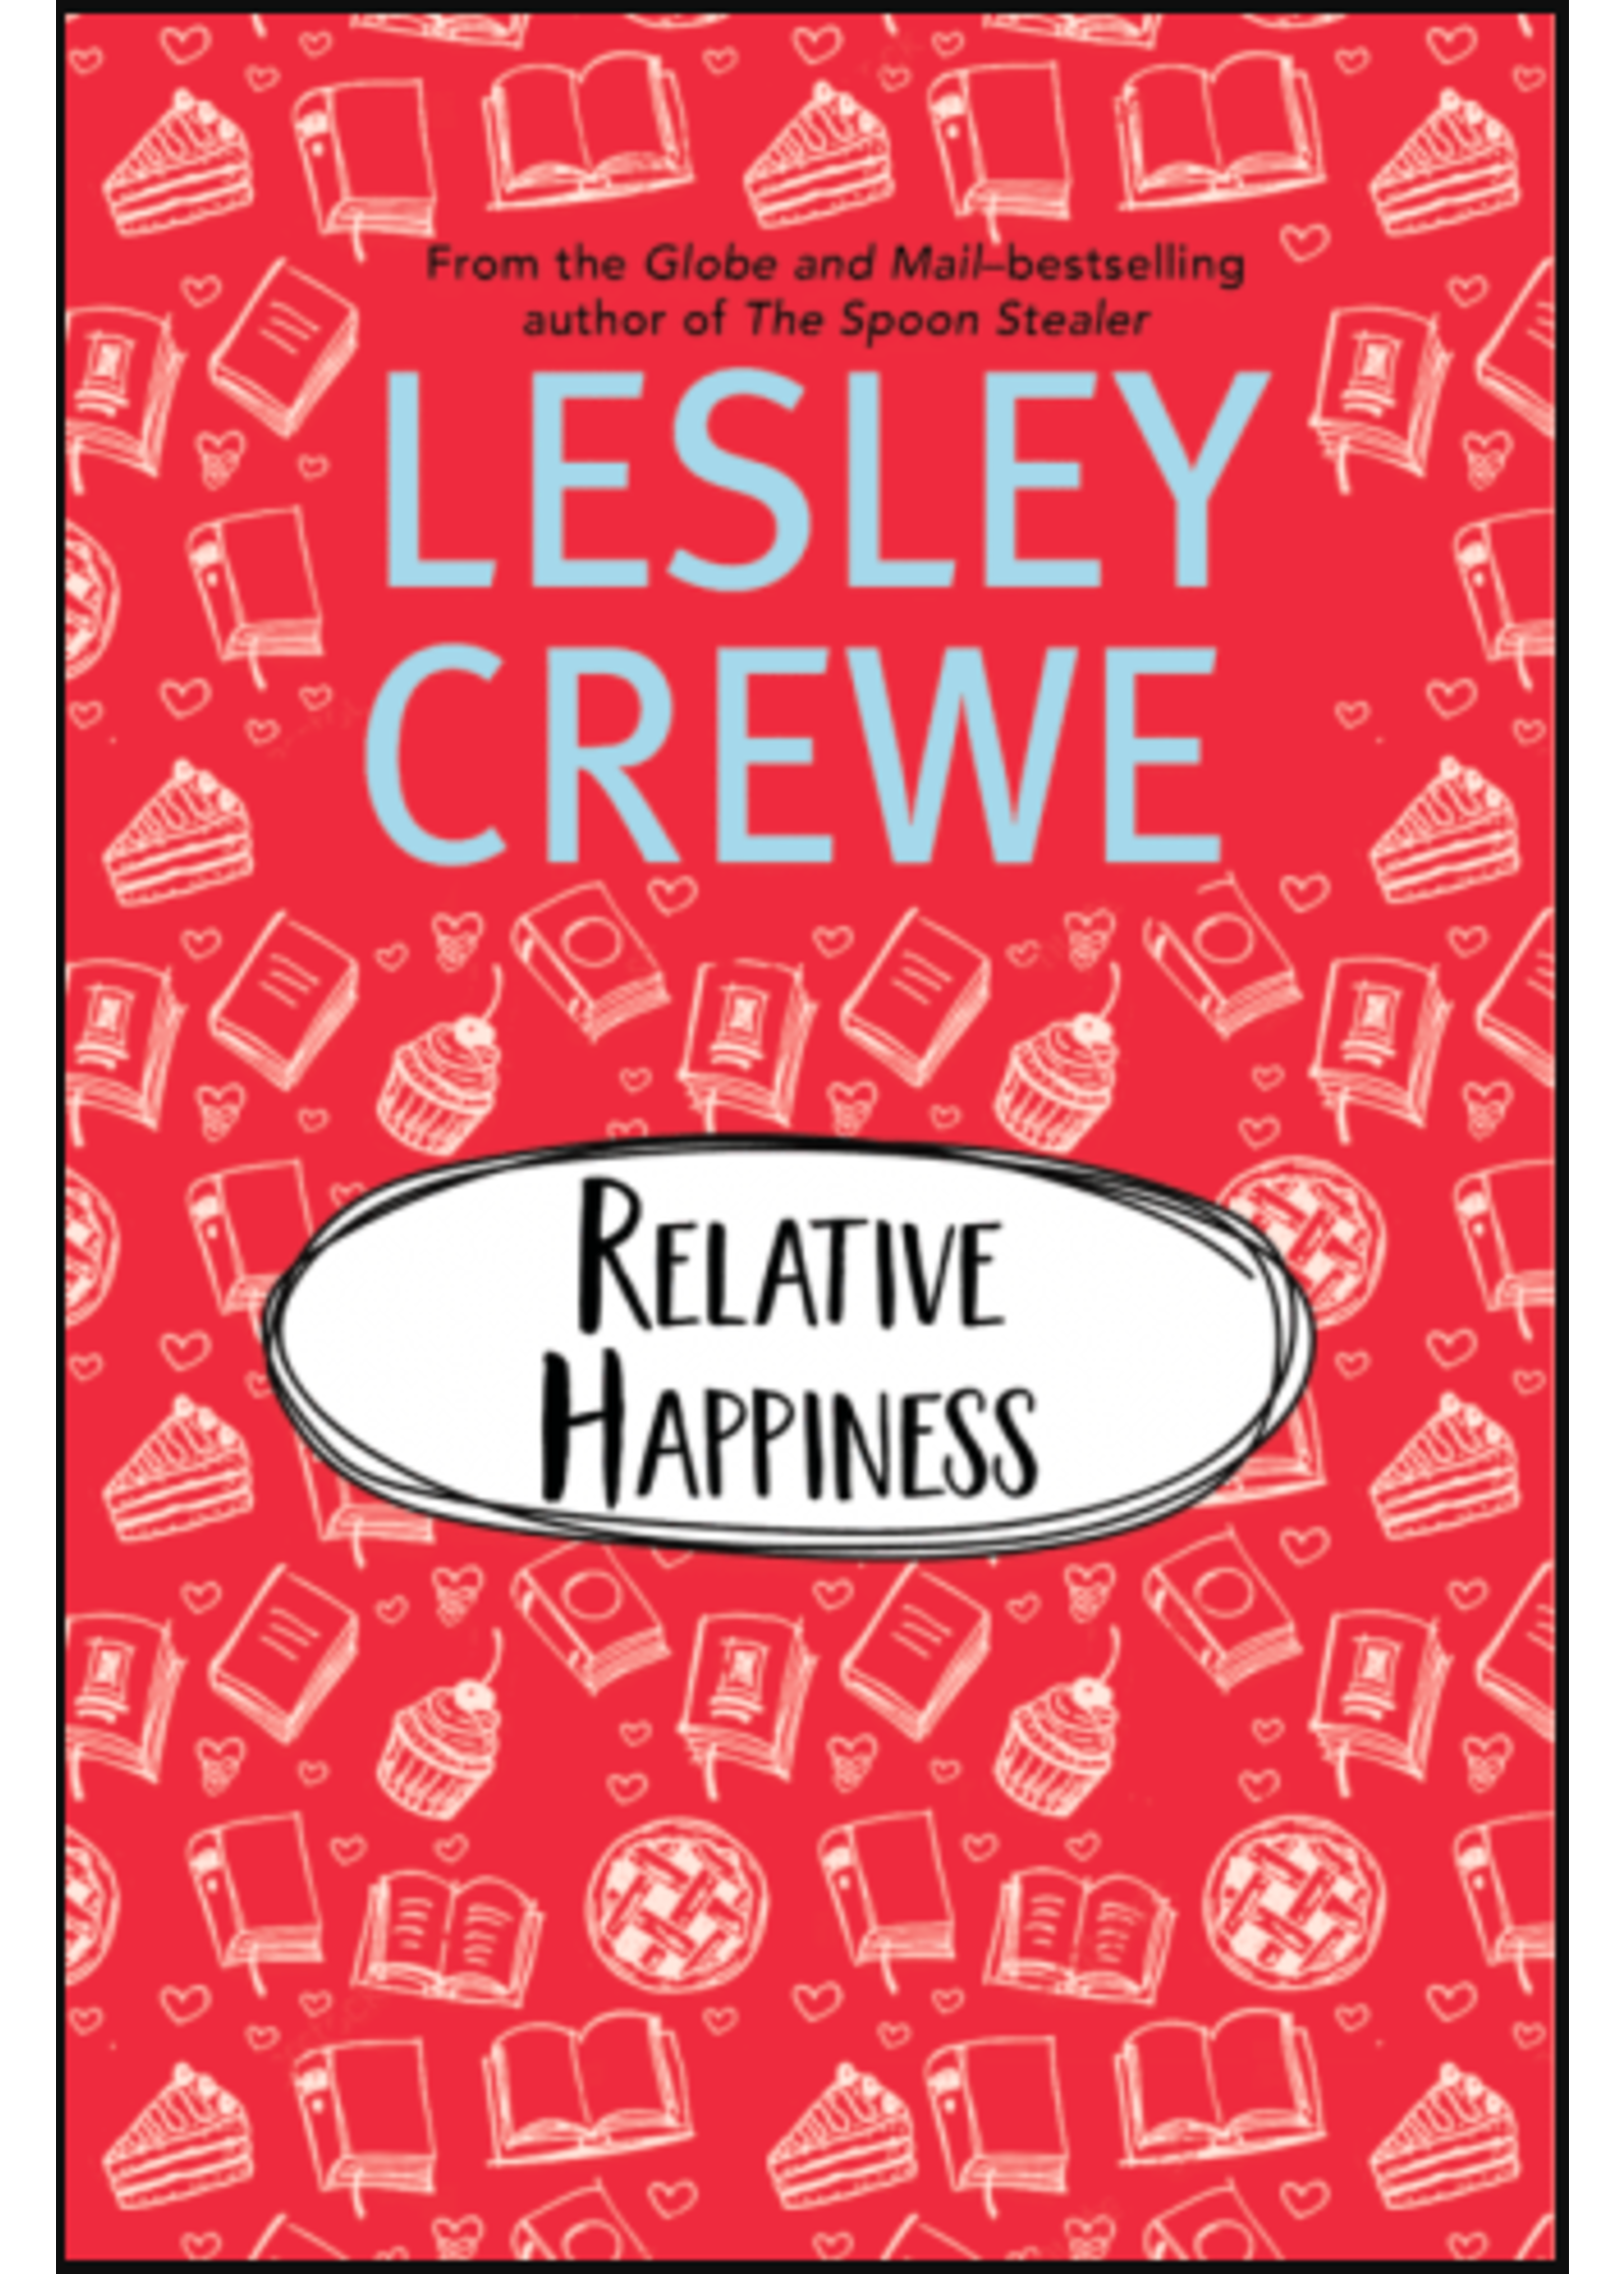 Relative Happiness by Lesley Crewe